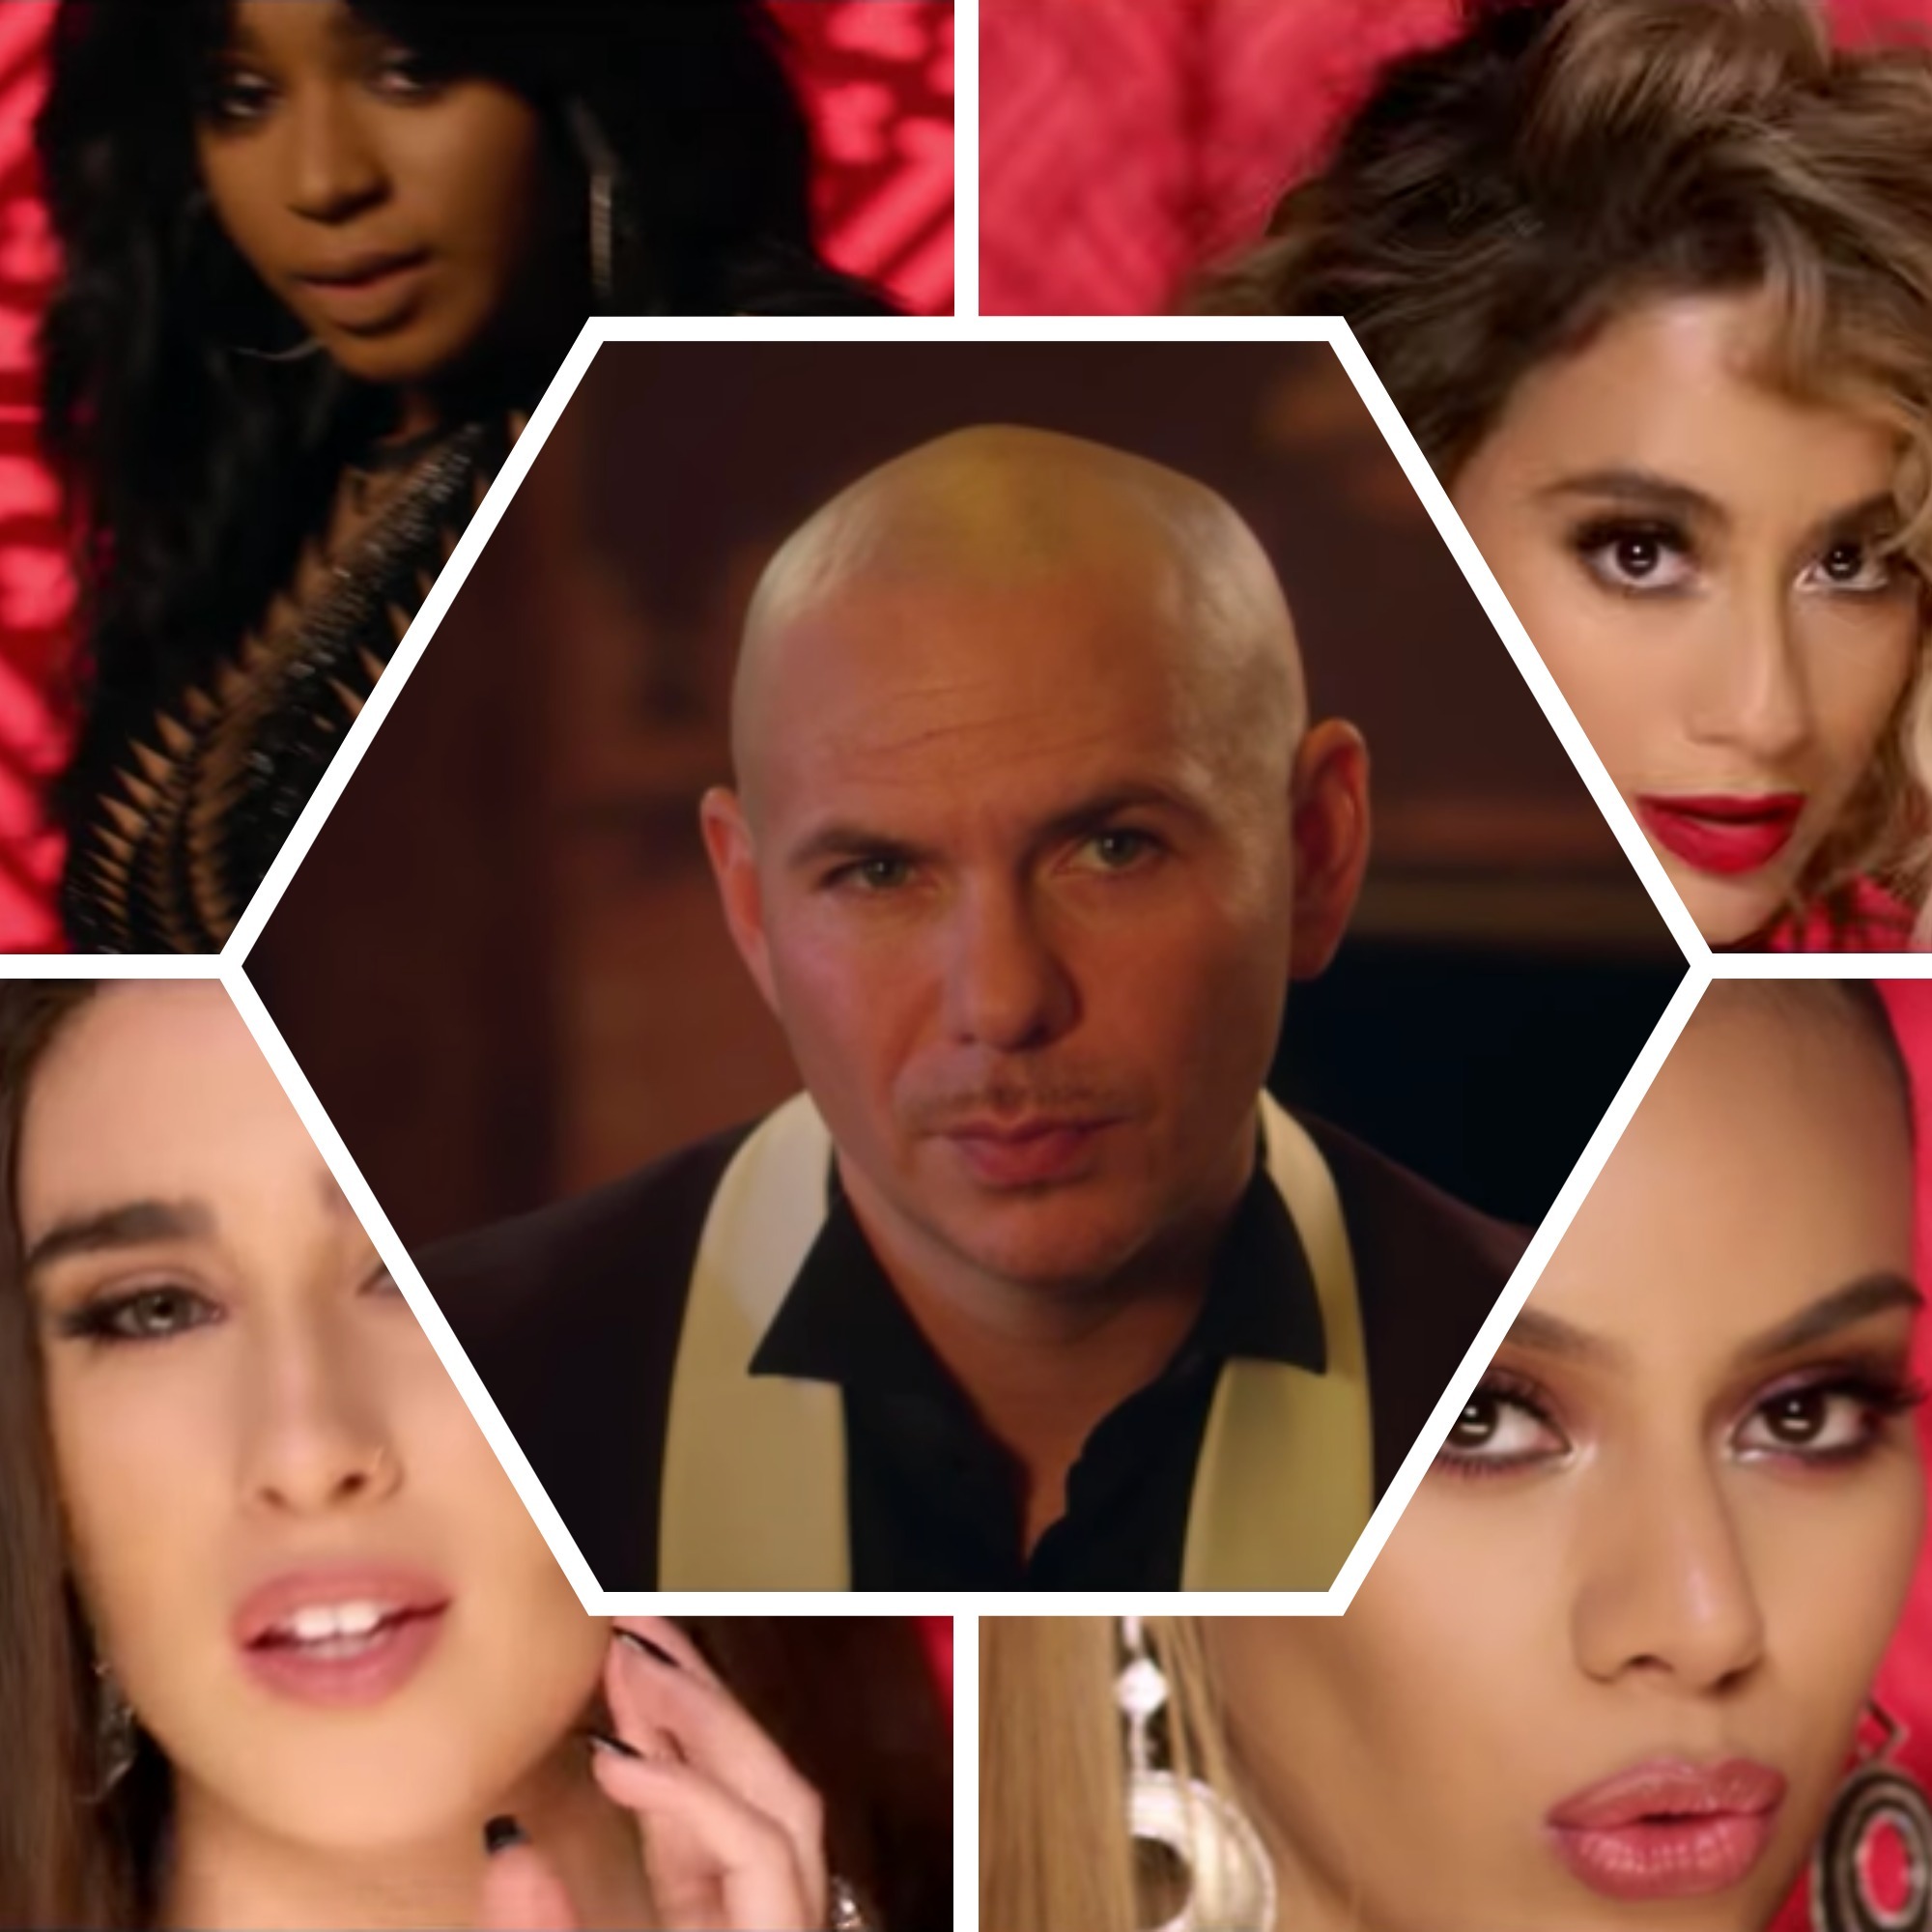 Pitbull and Fifth Harmony aim to heat up the holidays with their new collab...